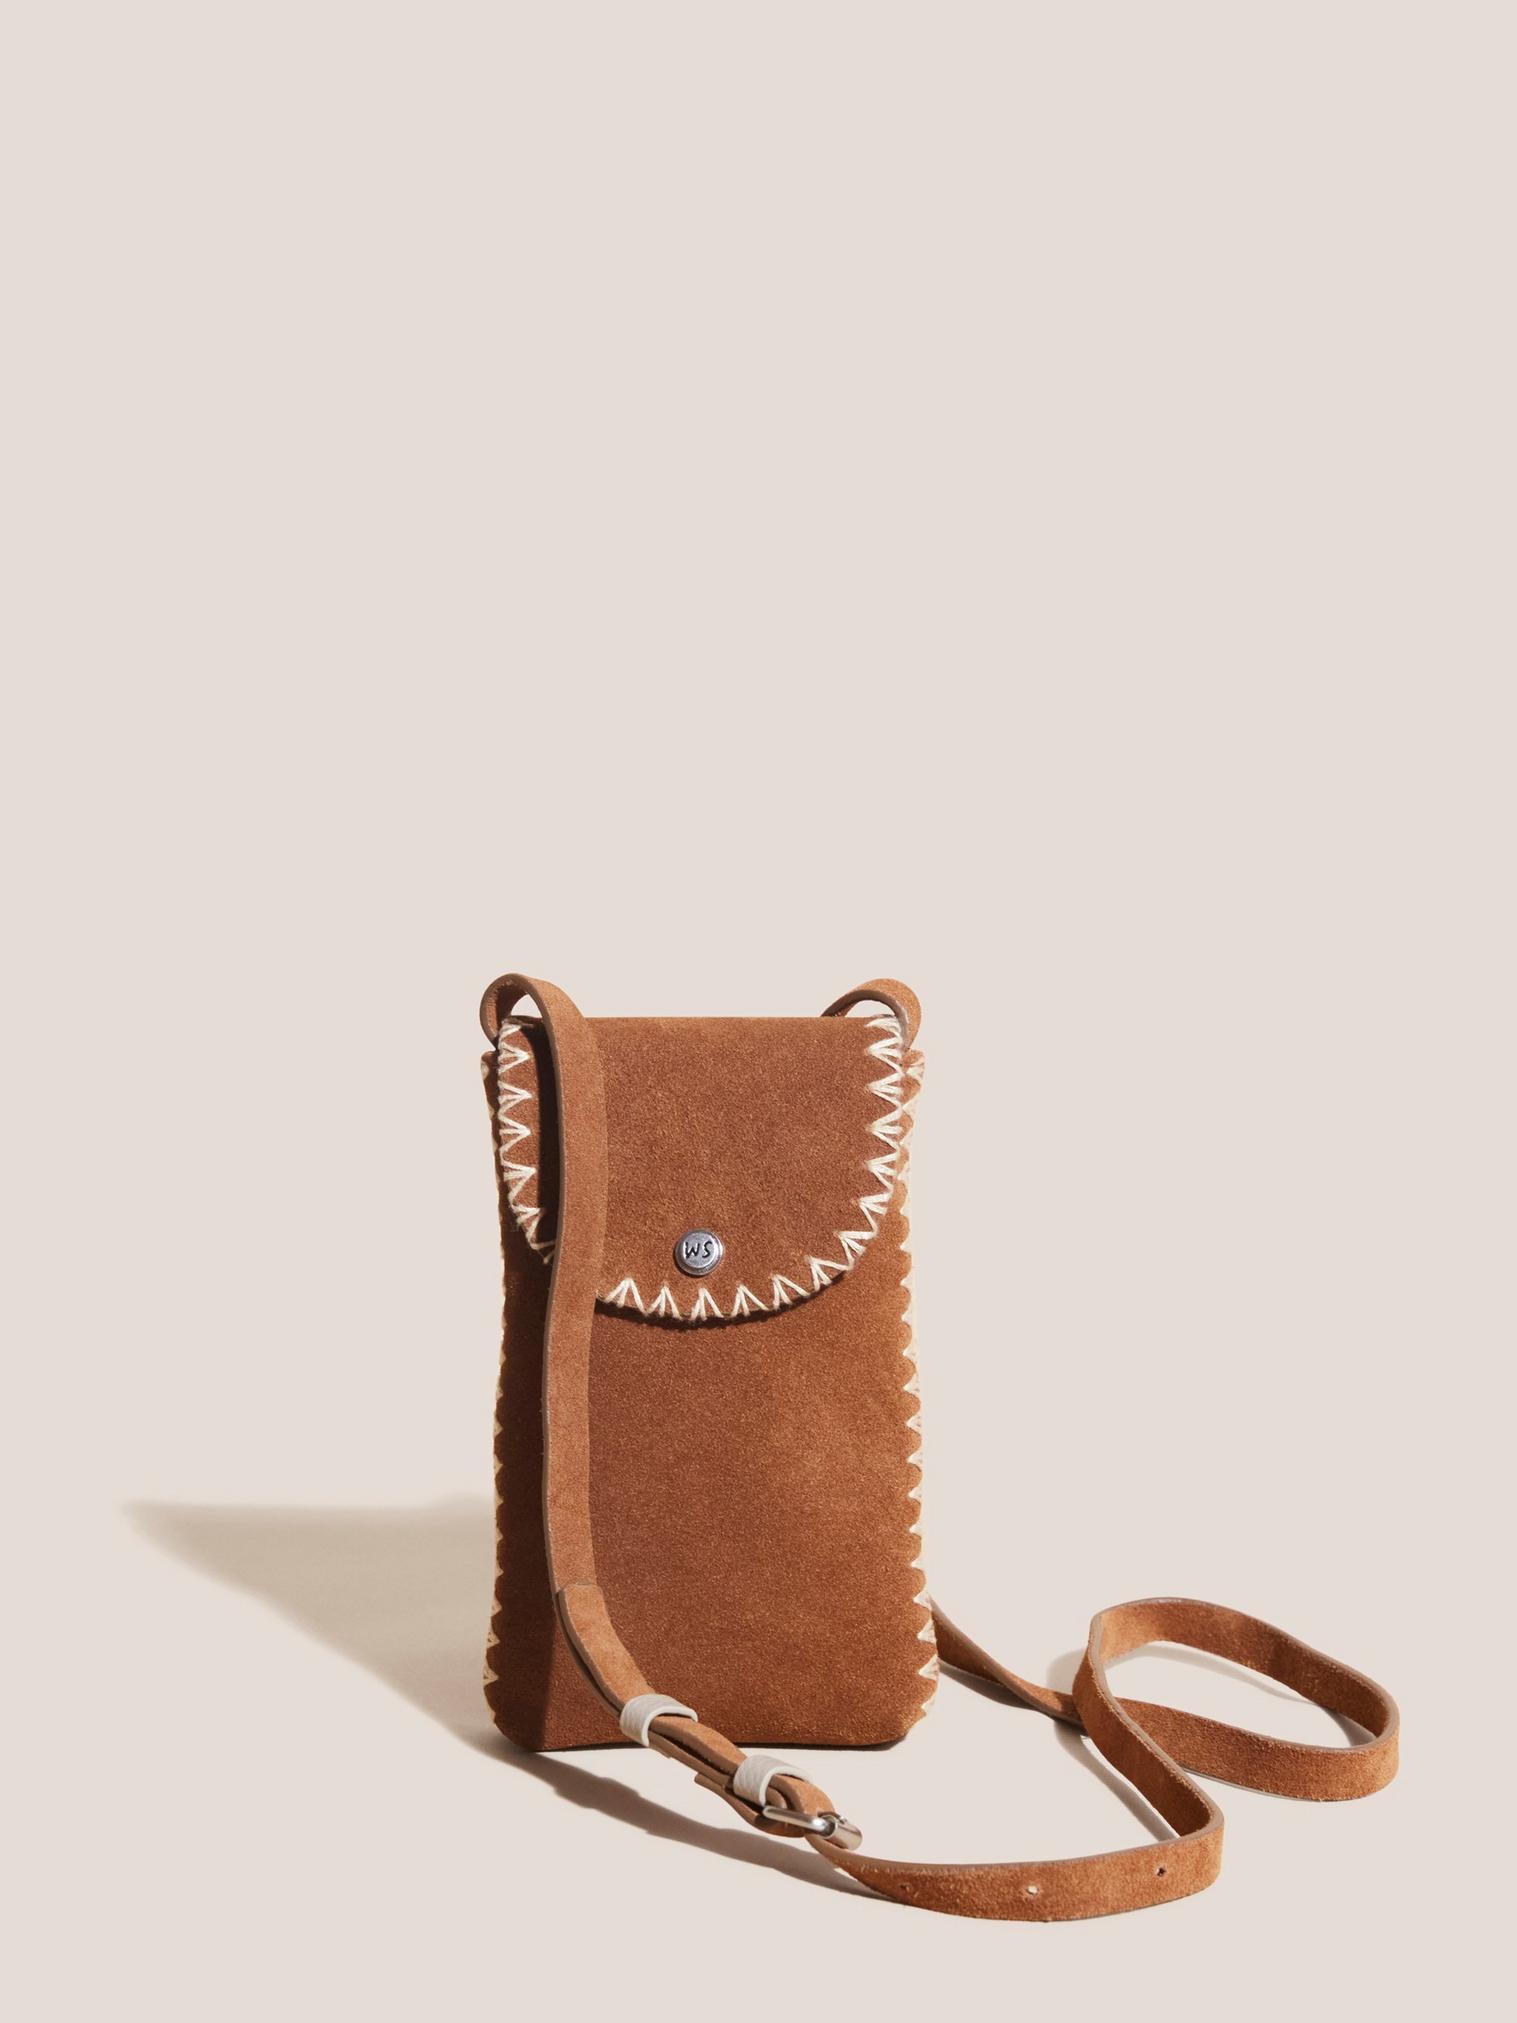 Craft Leather Phone Bag in TAN MULTI - MODEL FRONT